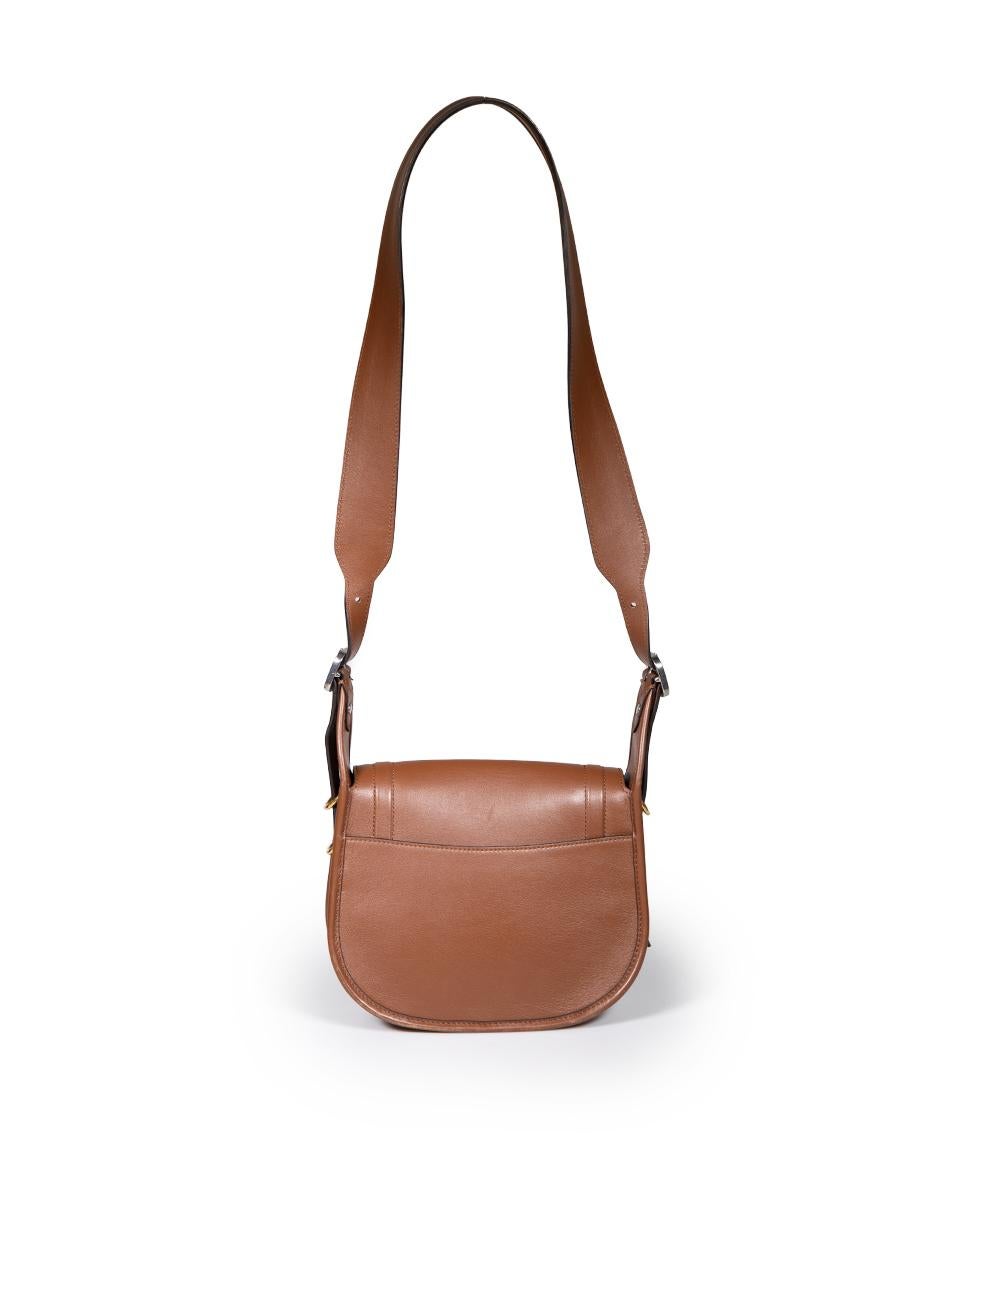 Mulberry Brown Calf Leather Small Sadie Silky Satchel In Good Condition For Sale In London, GB